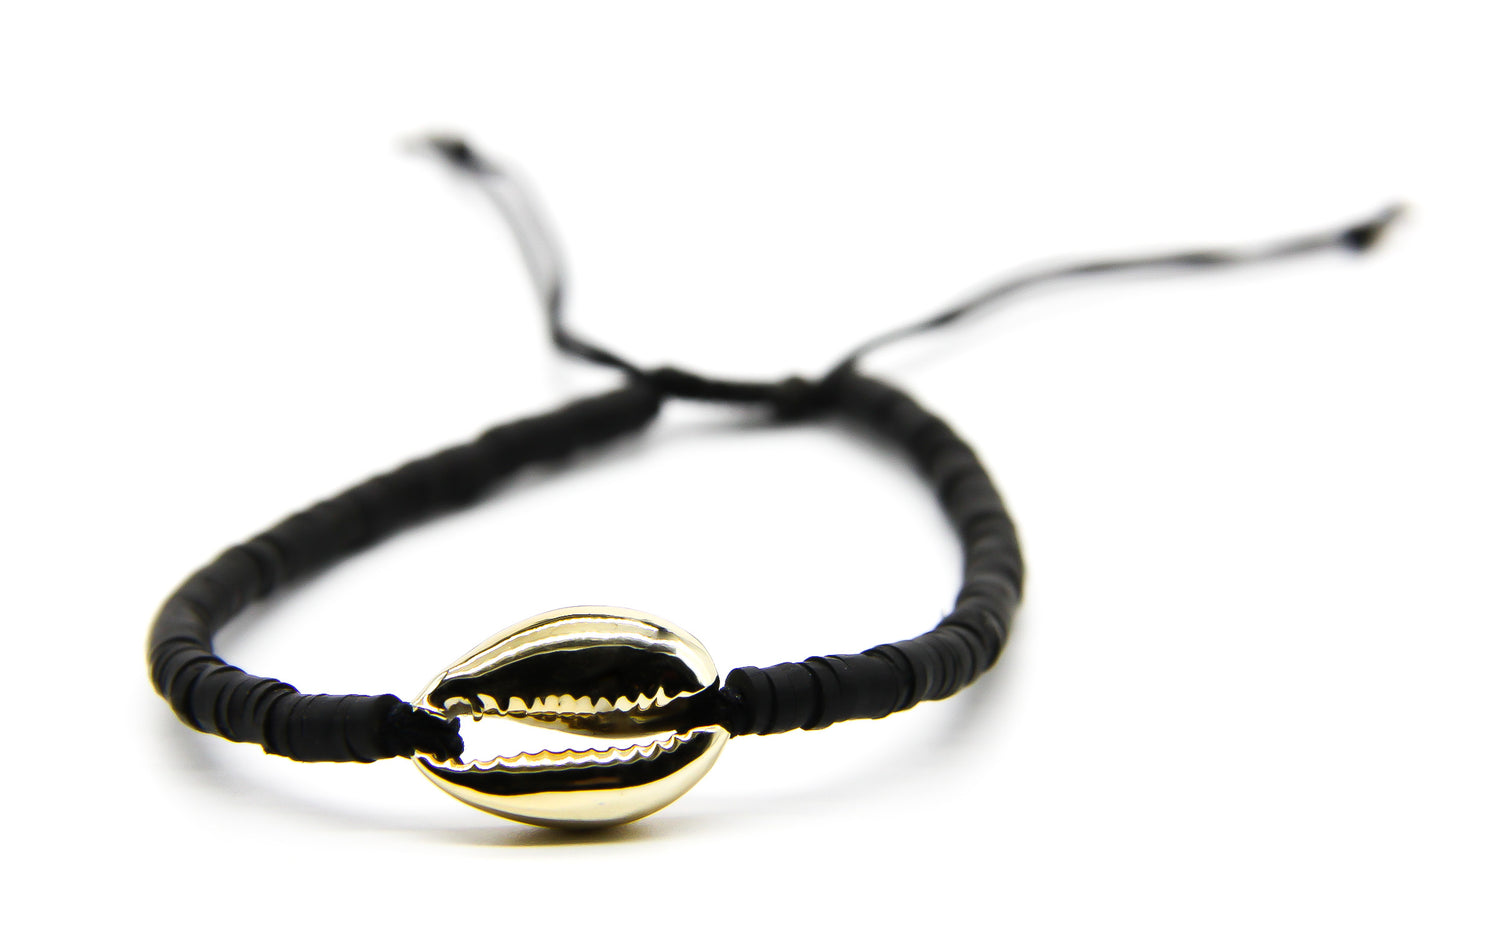 Black braided beach style bracelet with gold cowrie shell pendant